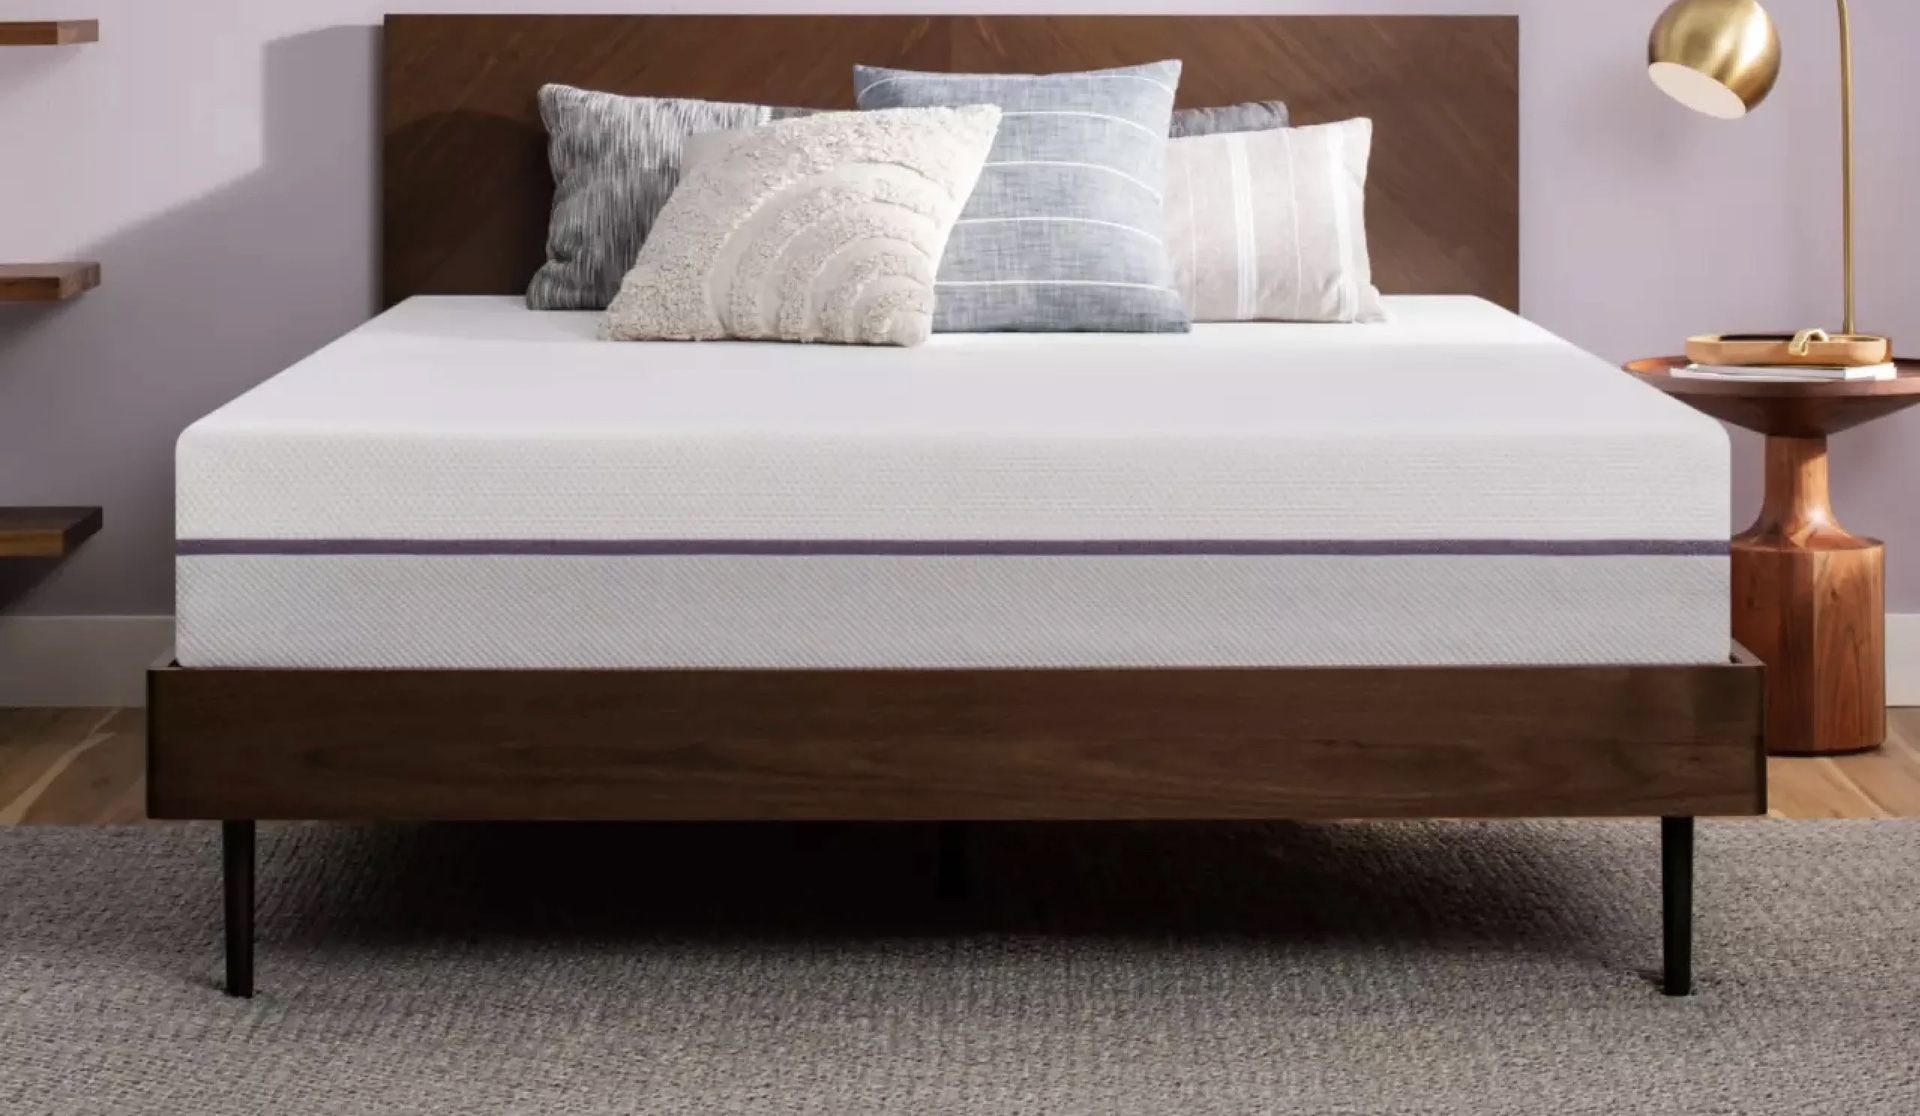 New Queen Mattress, Purple Brand, Like New, Perfect Condition